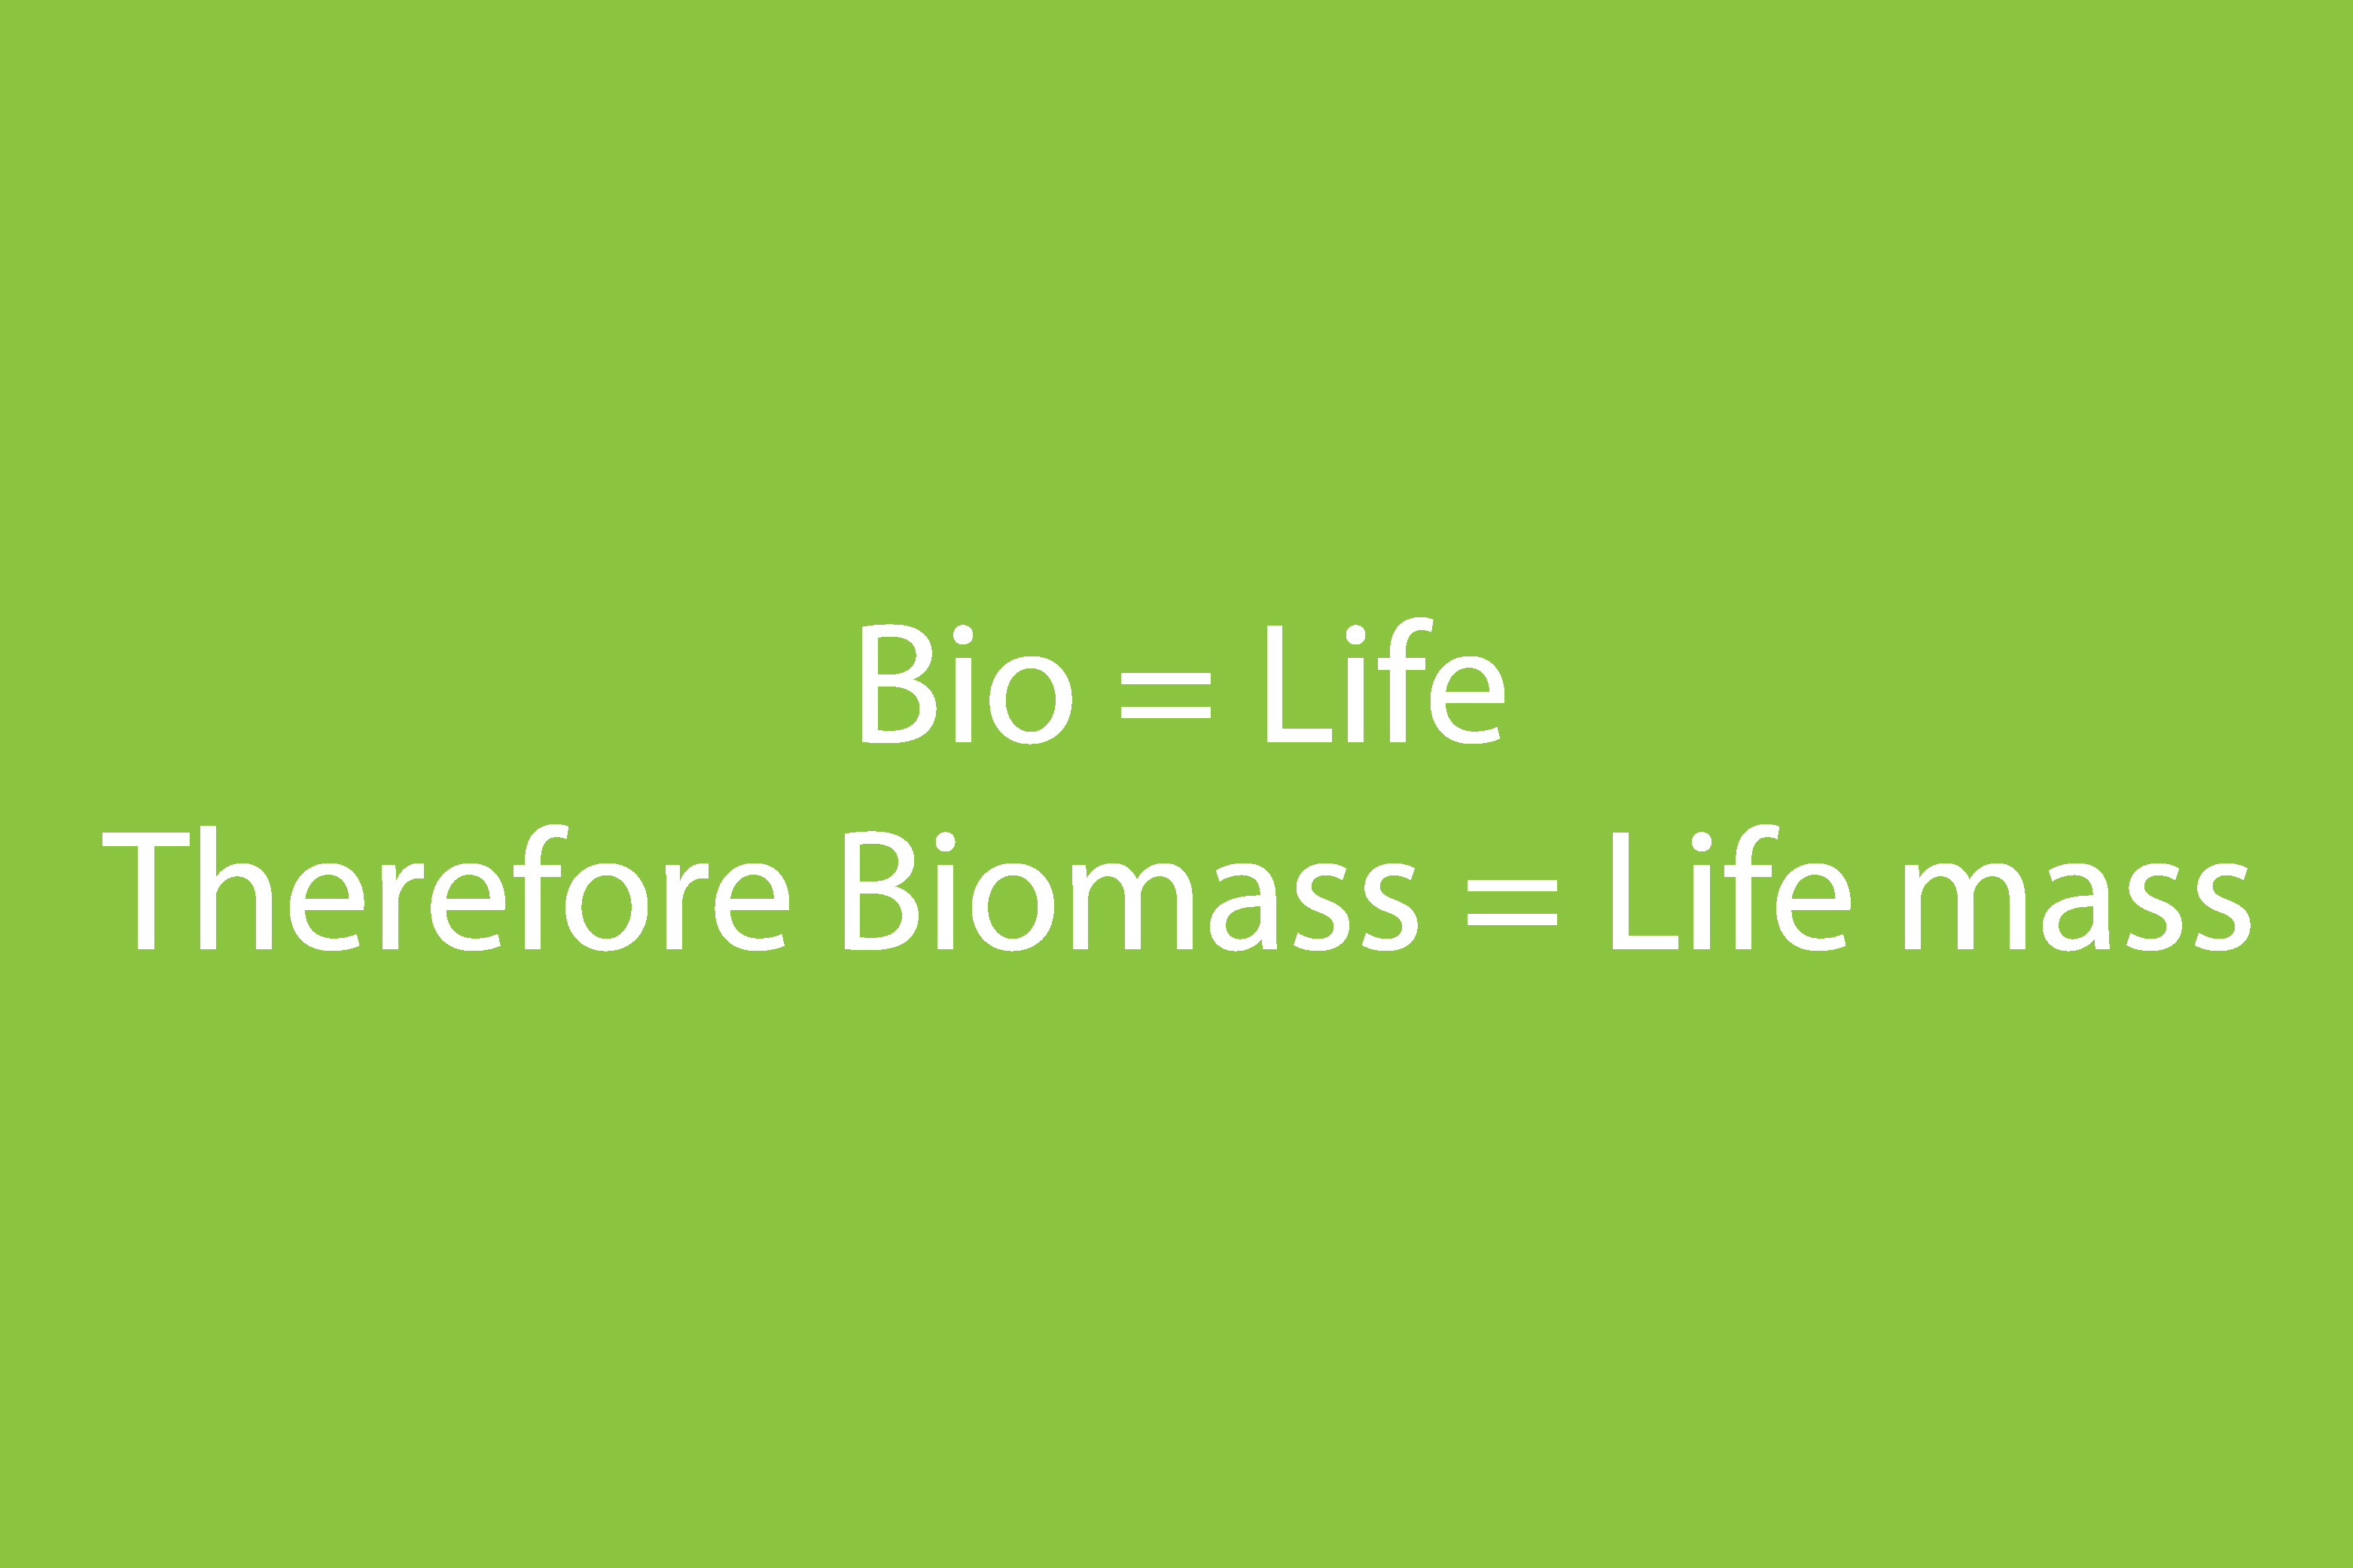 Biomass means the mass of life